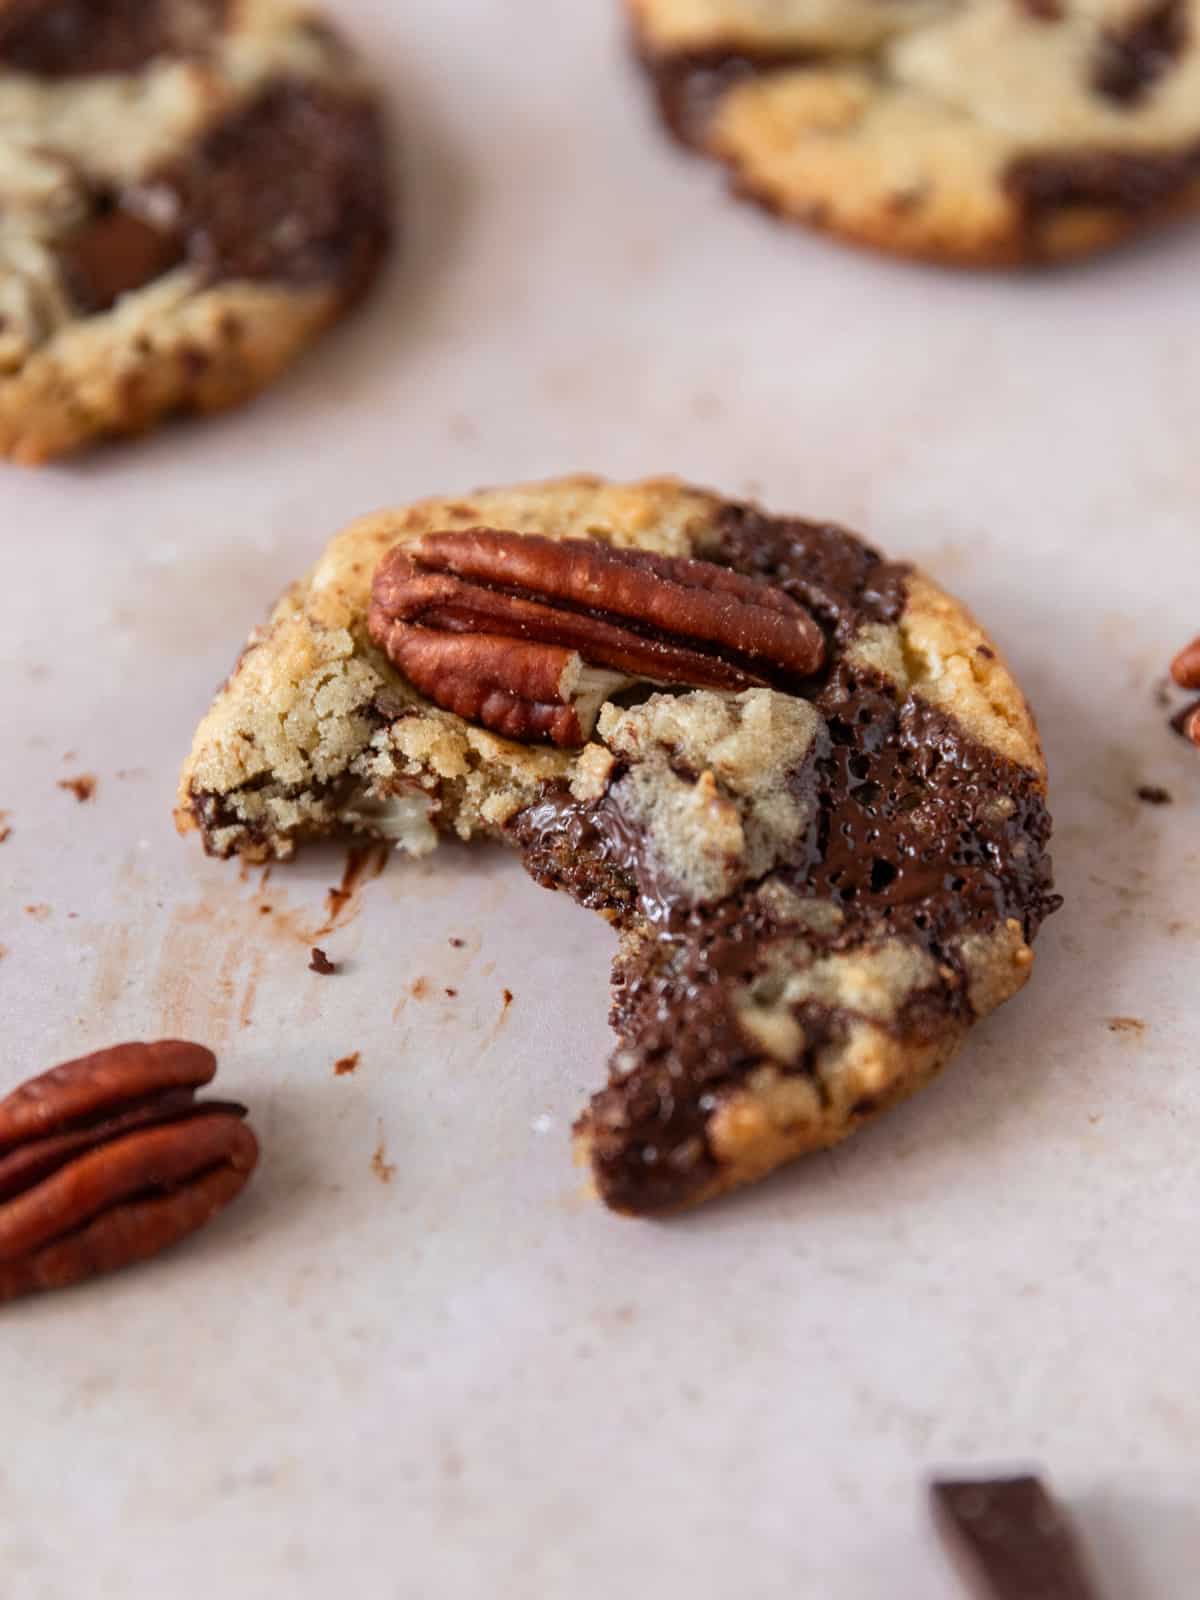 a pecan chocolate chip cookie with a bite out of it surrounded by other cookies, pecans, and chocolate.